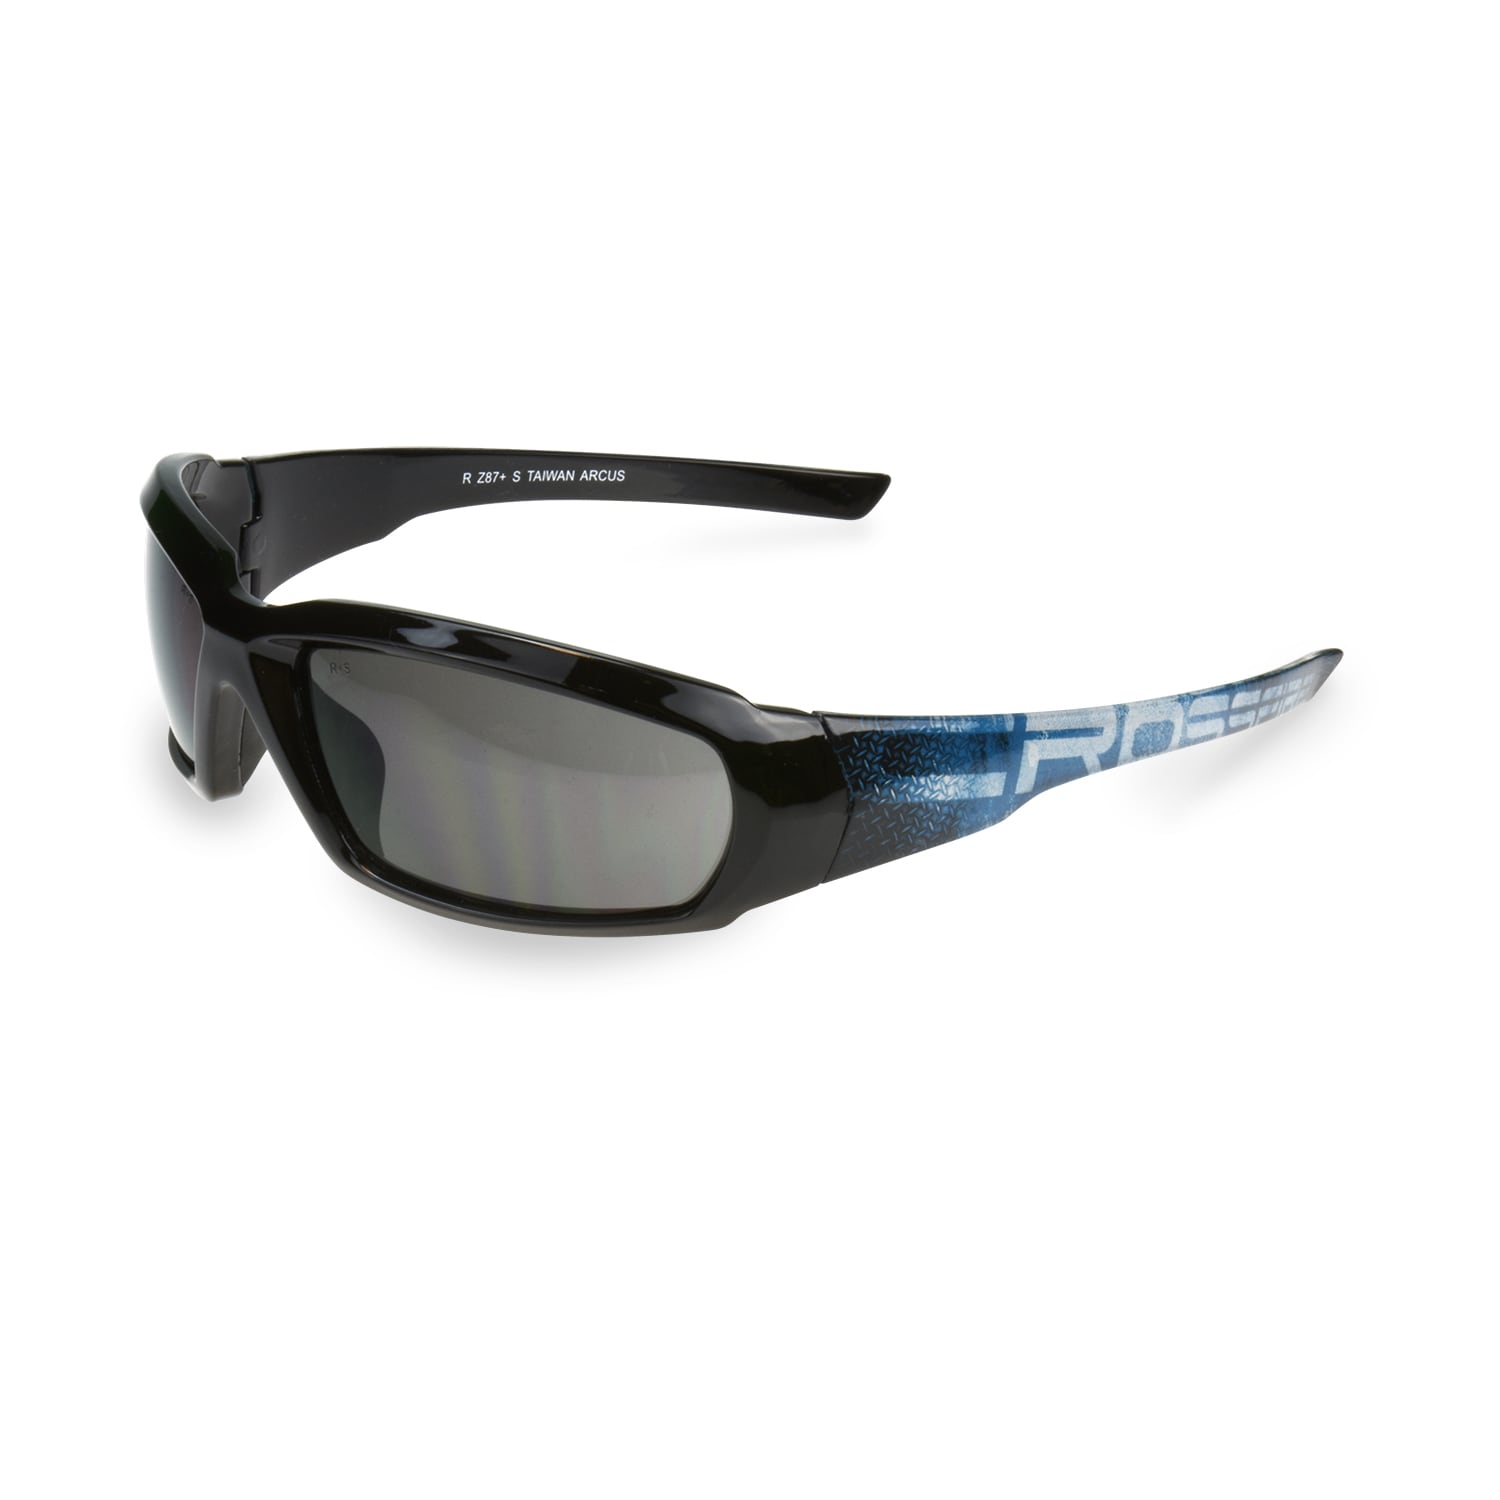 Crossfire 4061 Safety Glasses : : Sports & Outdoors